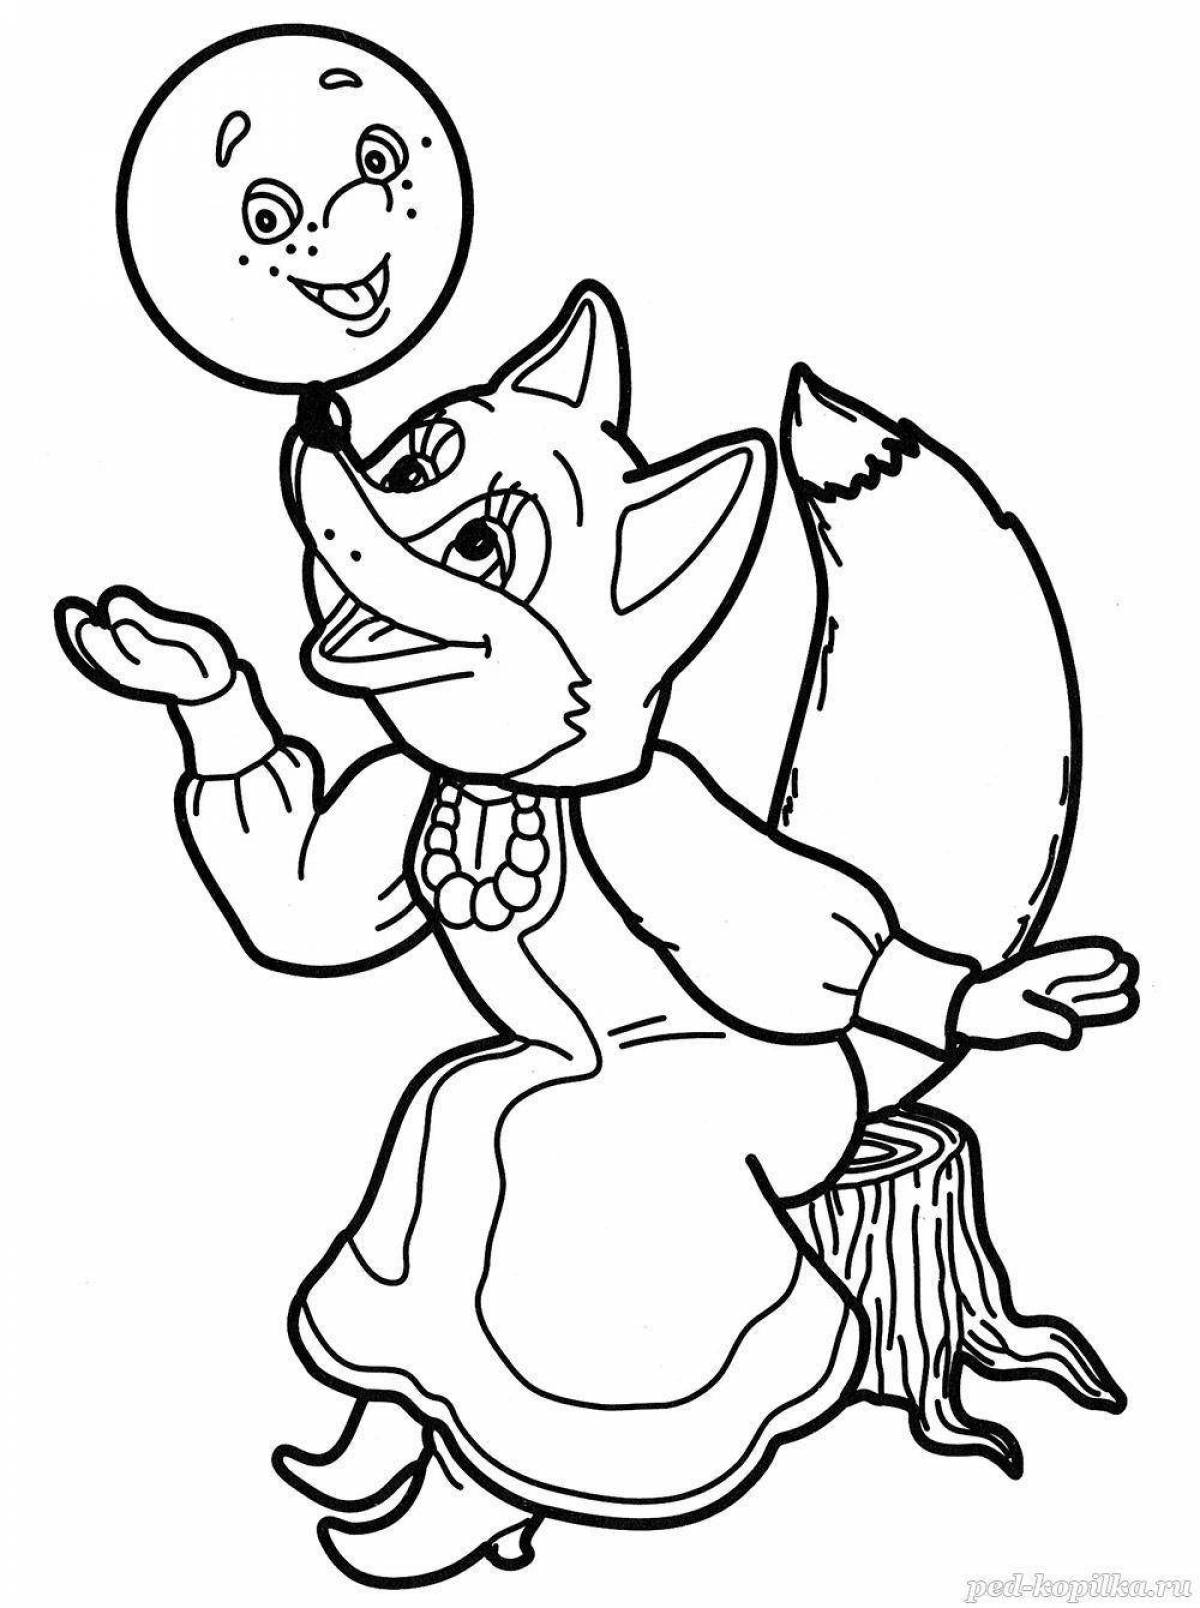 Coloring page playful fox and rabbit